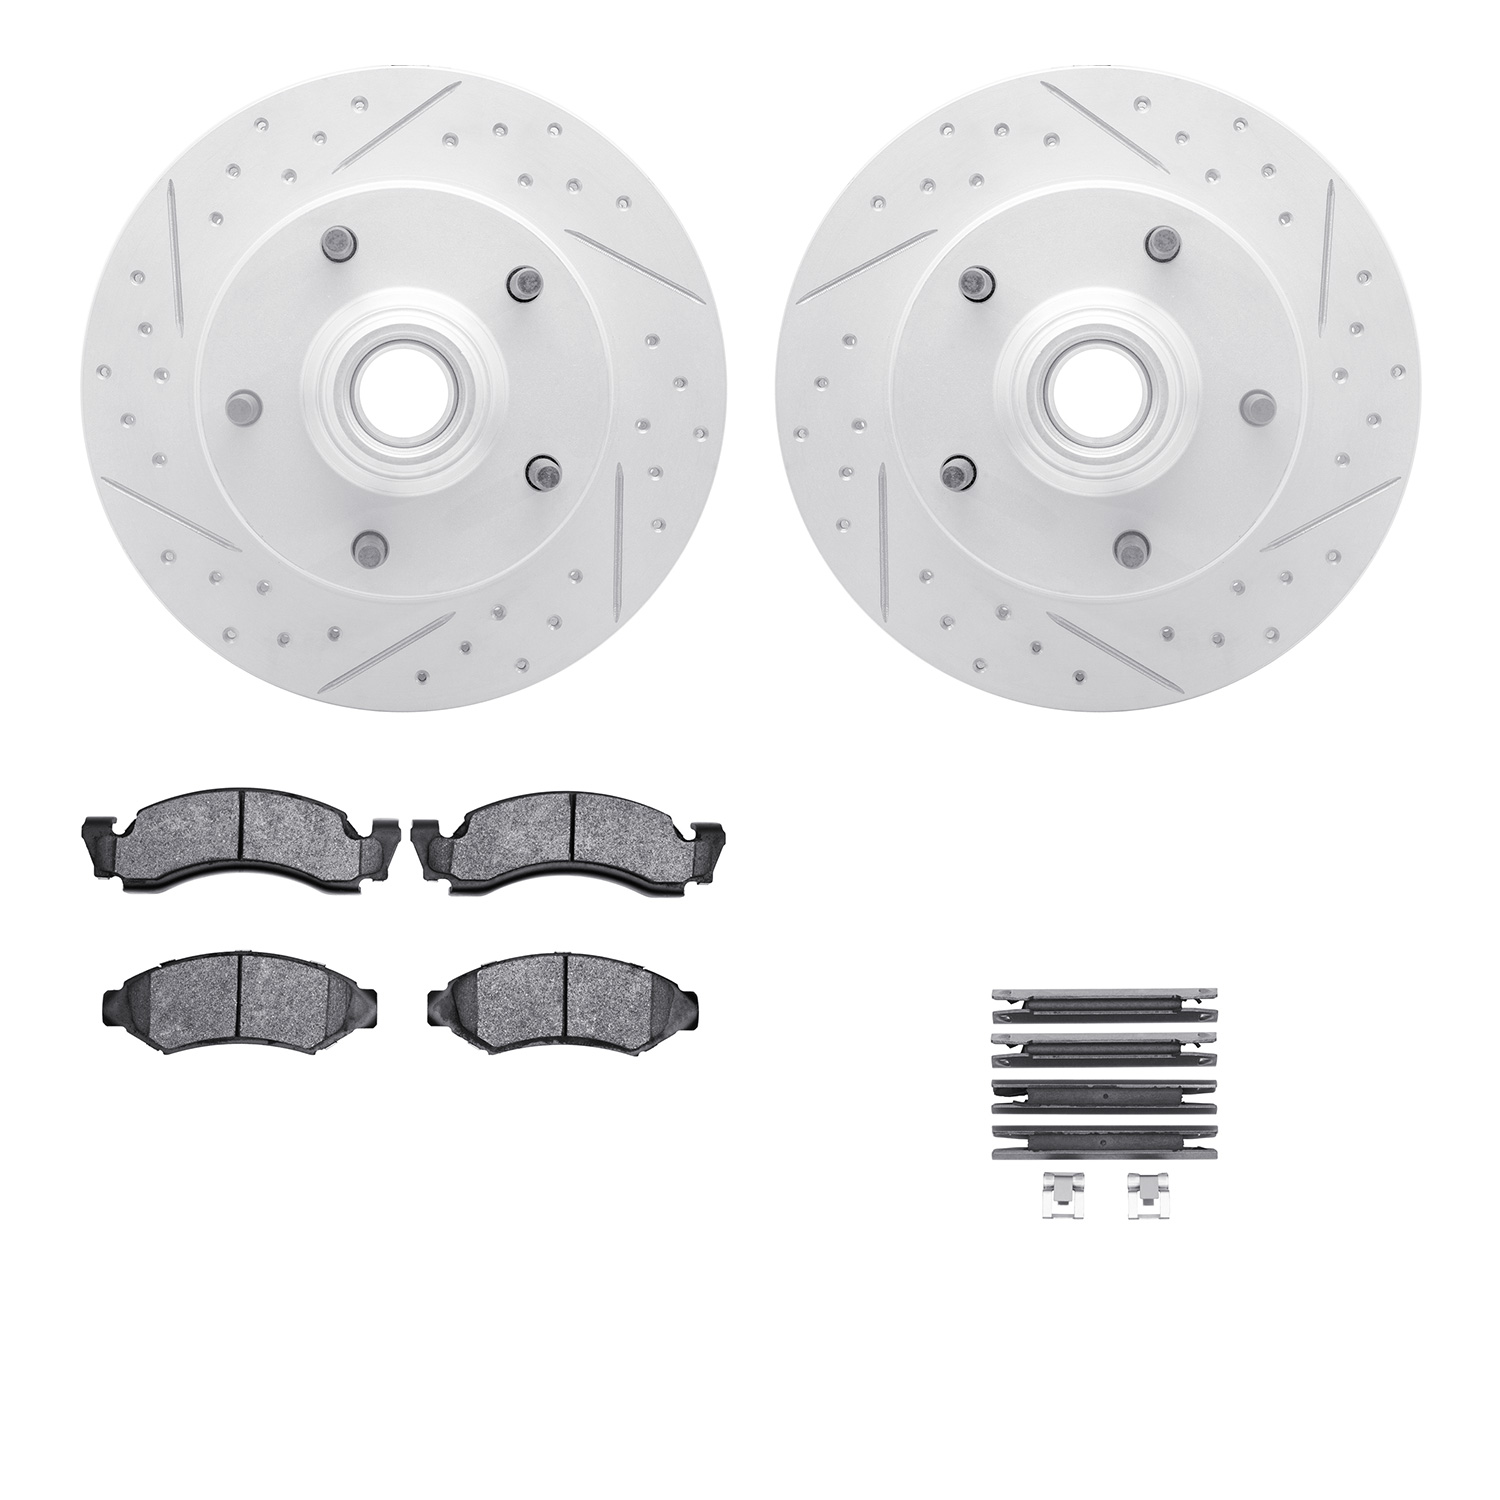 2212-99071 Geoperformance Drilled/Slotted Rotors w/Heavy-Duty Pads Kit & Hardware, 1986-1993 Ford/Lincoln/Mercury/Mazda, Positio